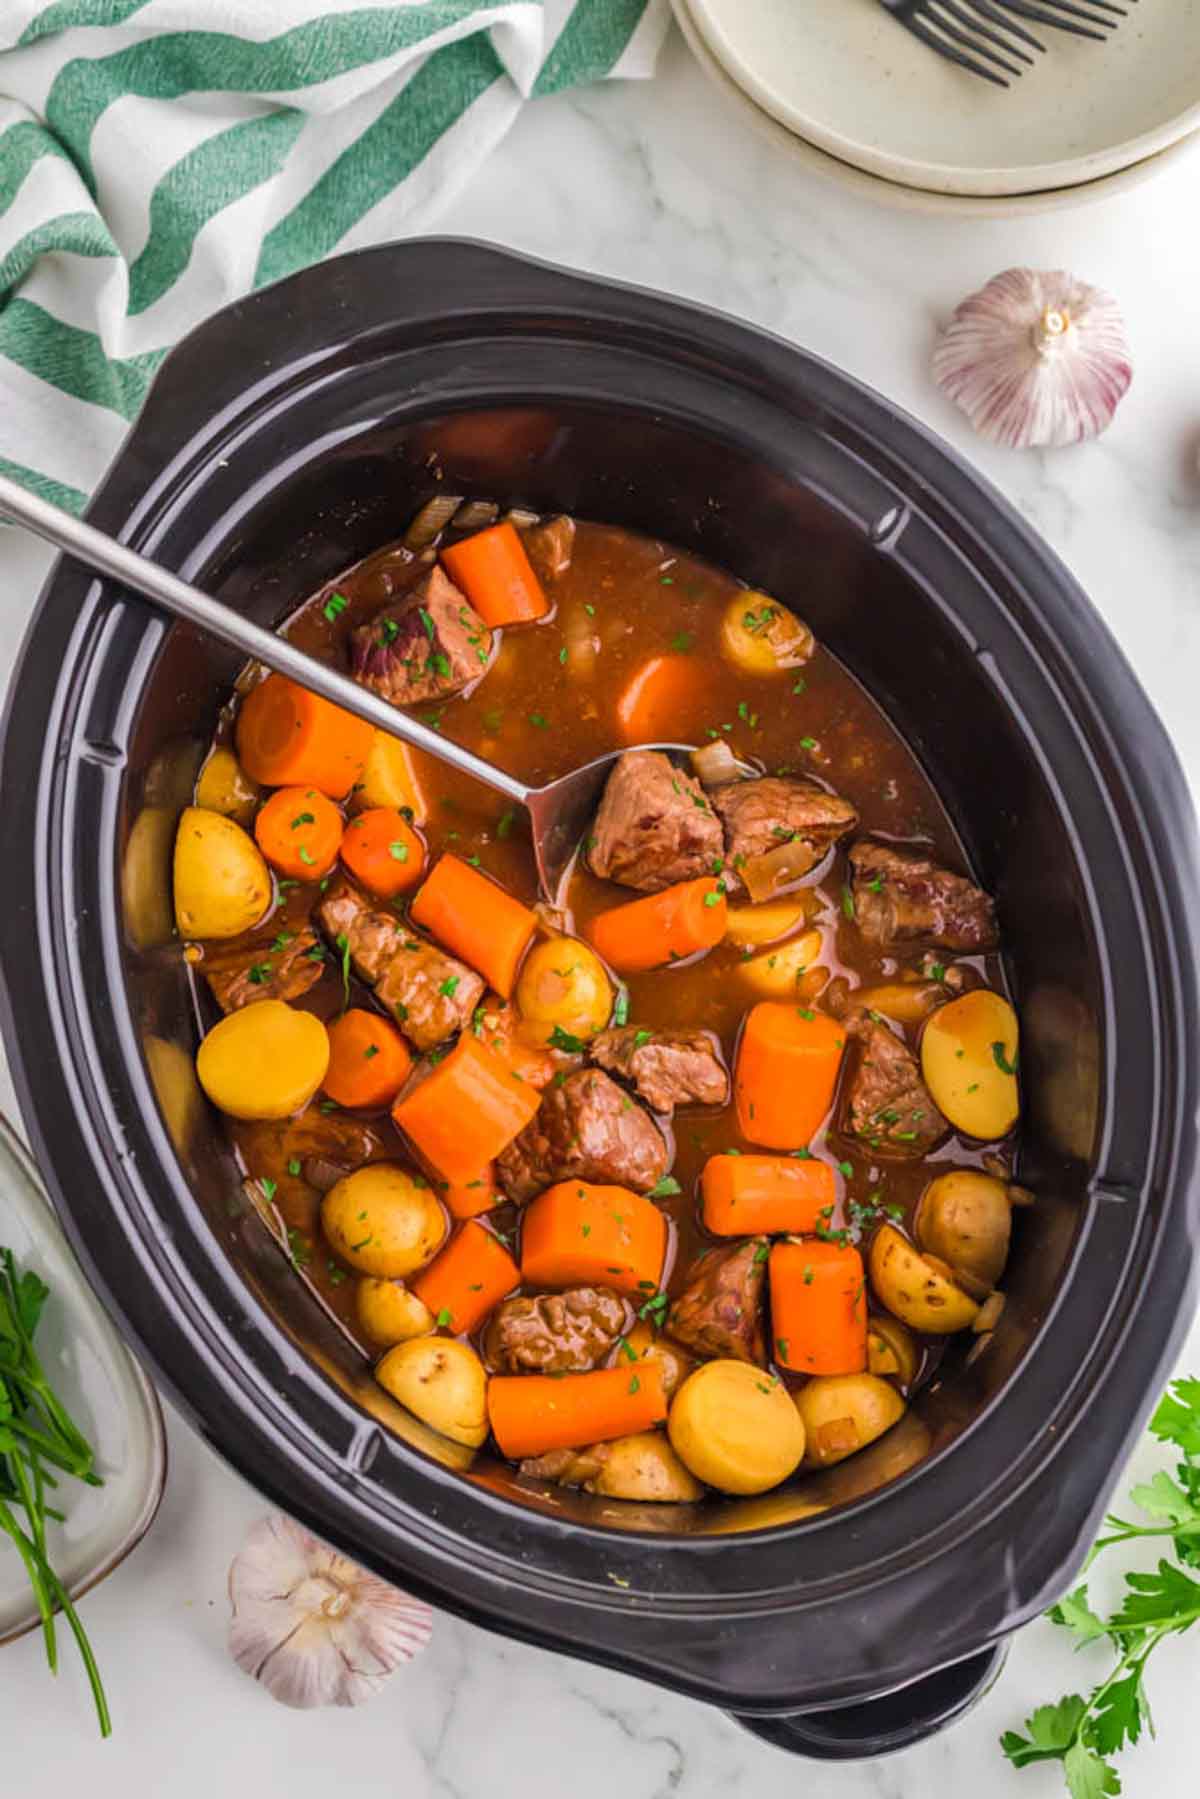 Crockpot Irish stew cooked in the slow cooker.